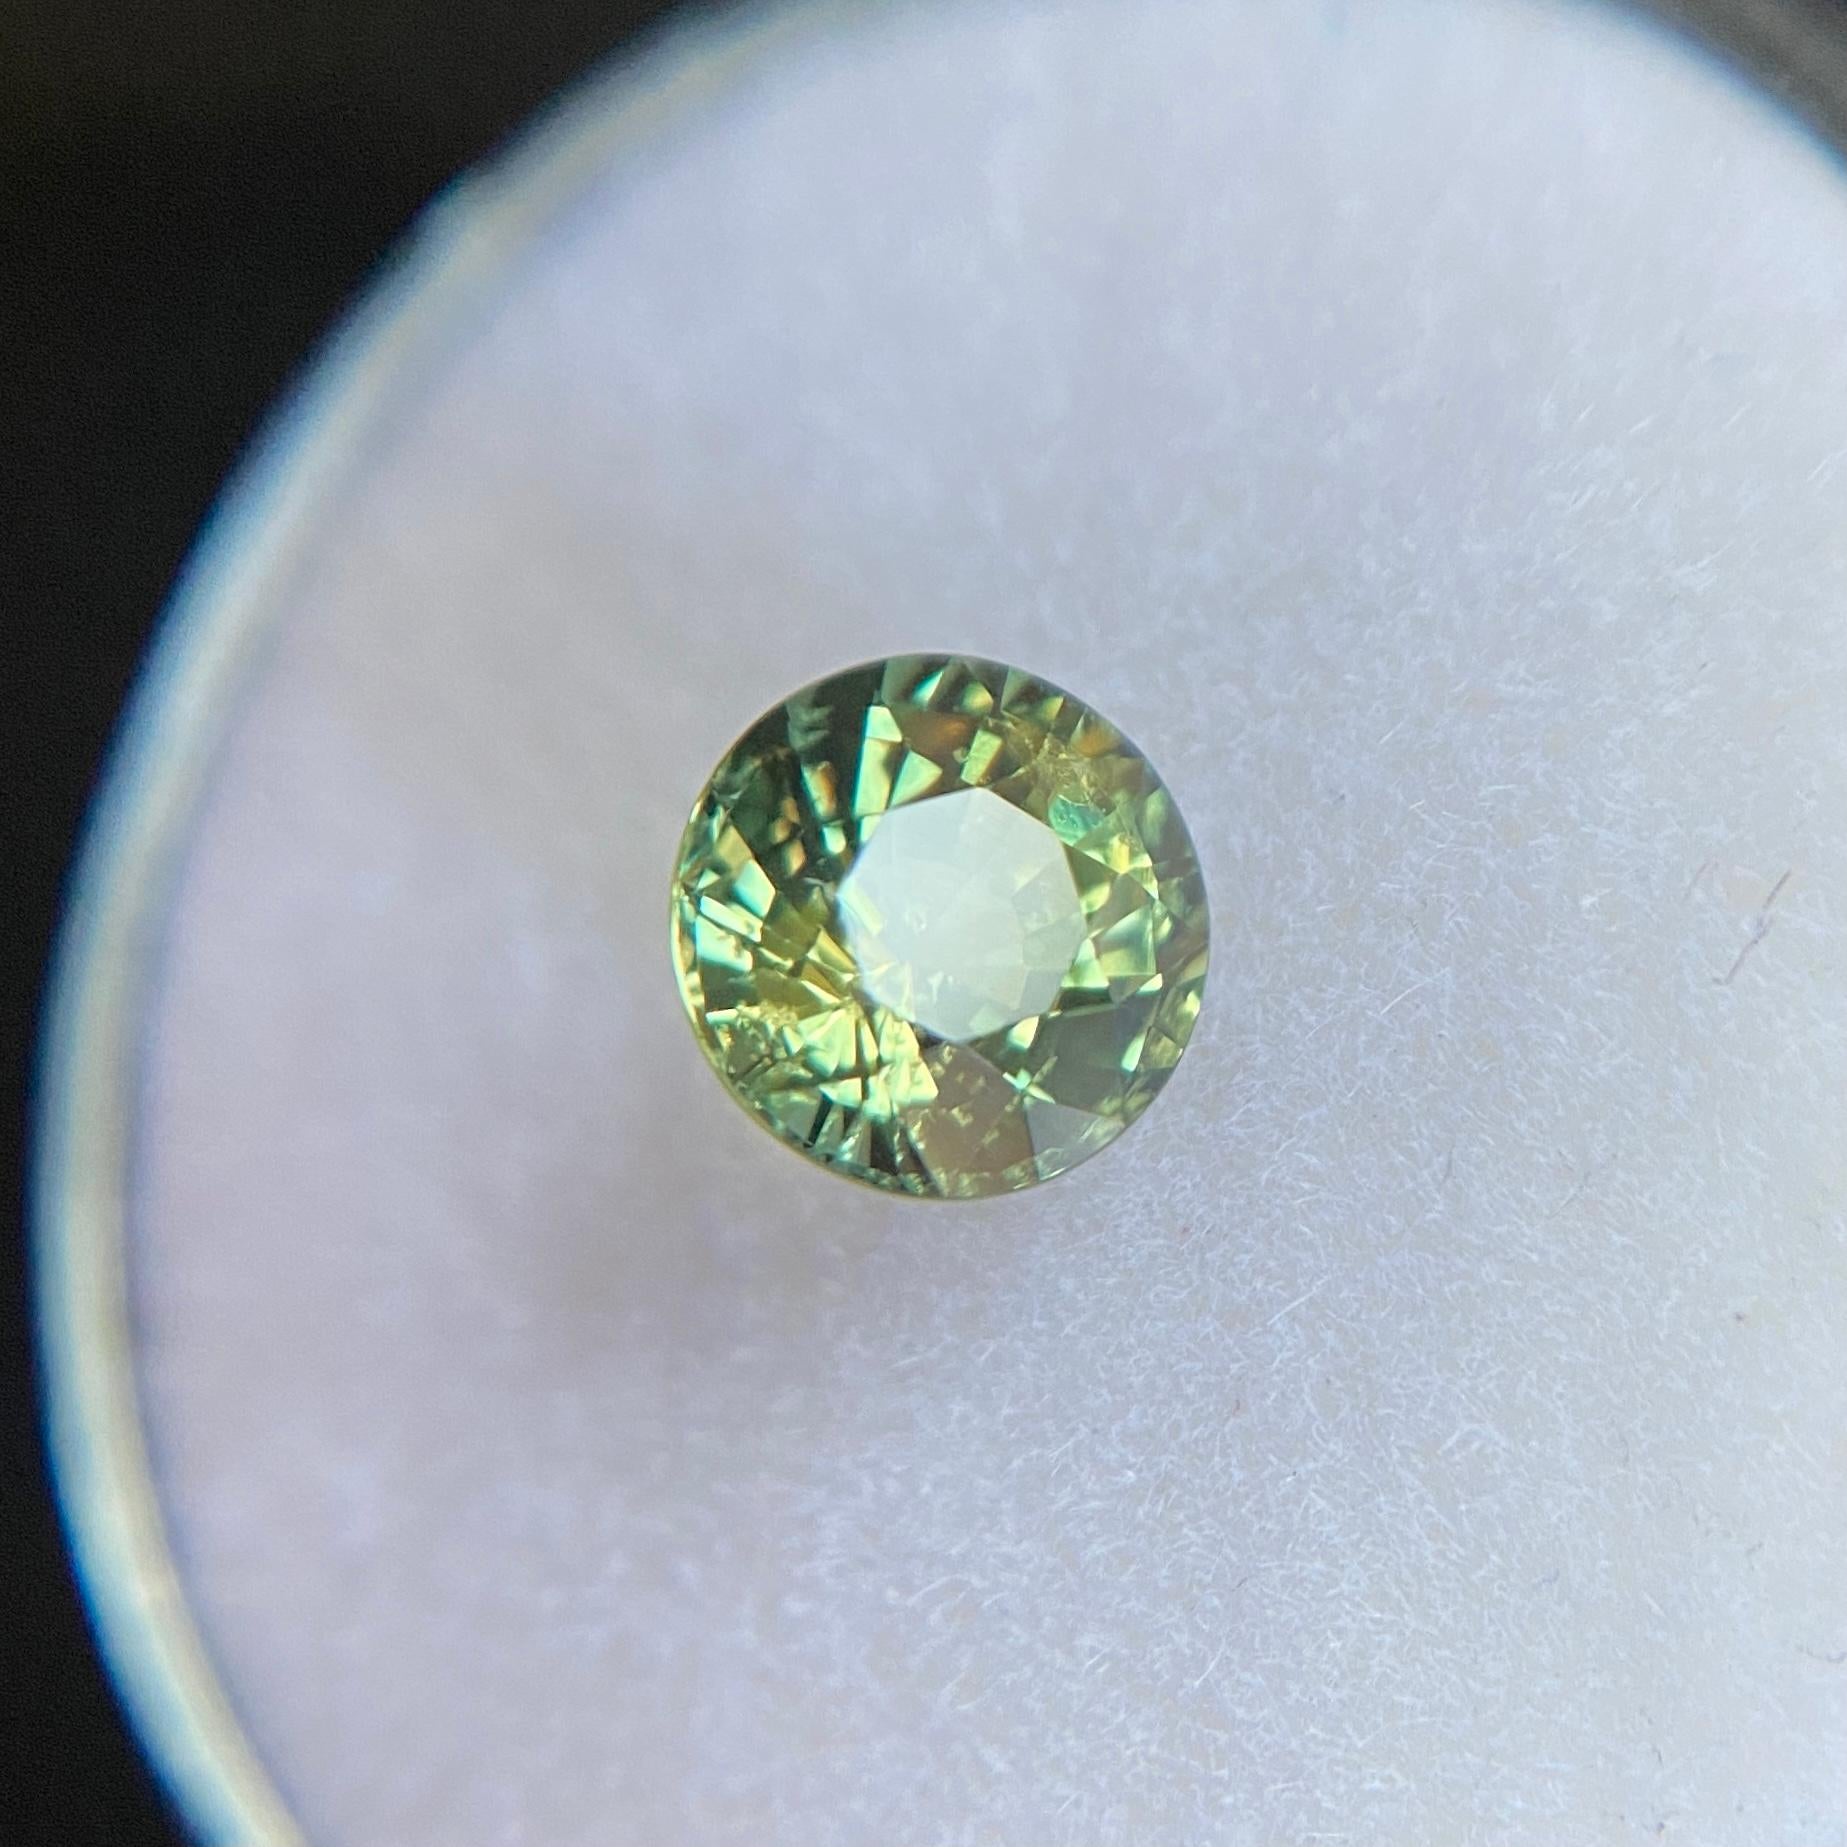 Round Cut GIA Certified 1.36ct Untreated Vivid Green Yellow Sapphire Round Diamond Cut Gem For Sale